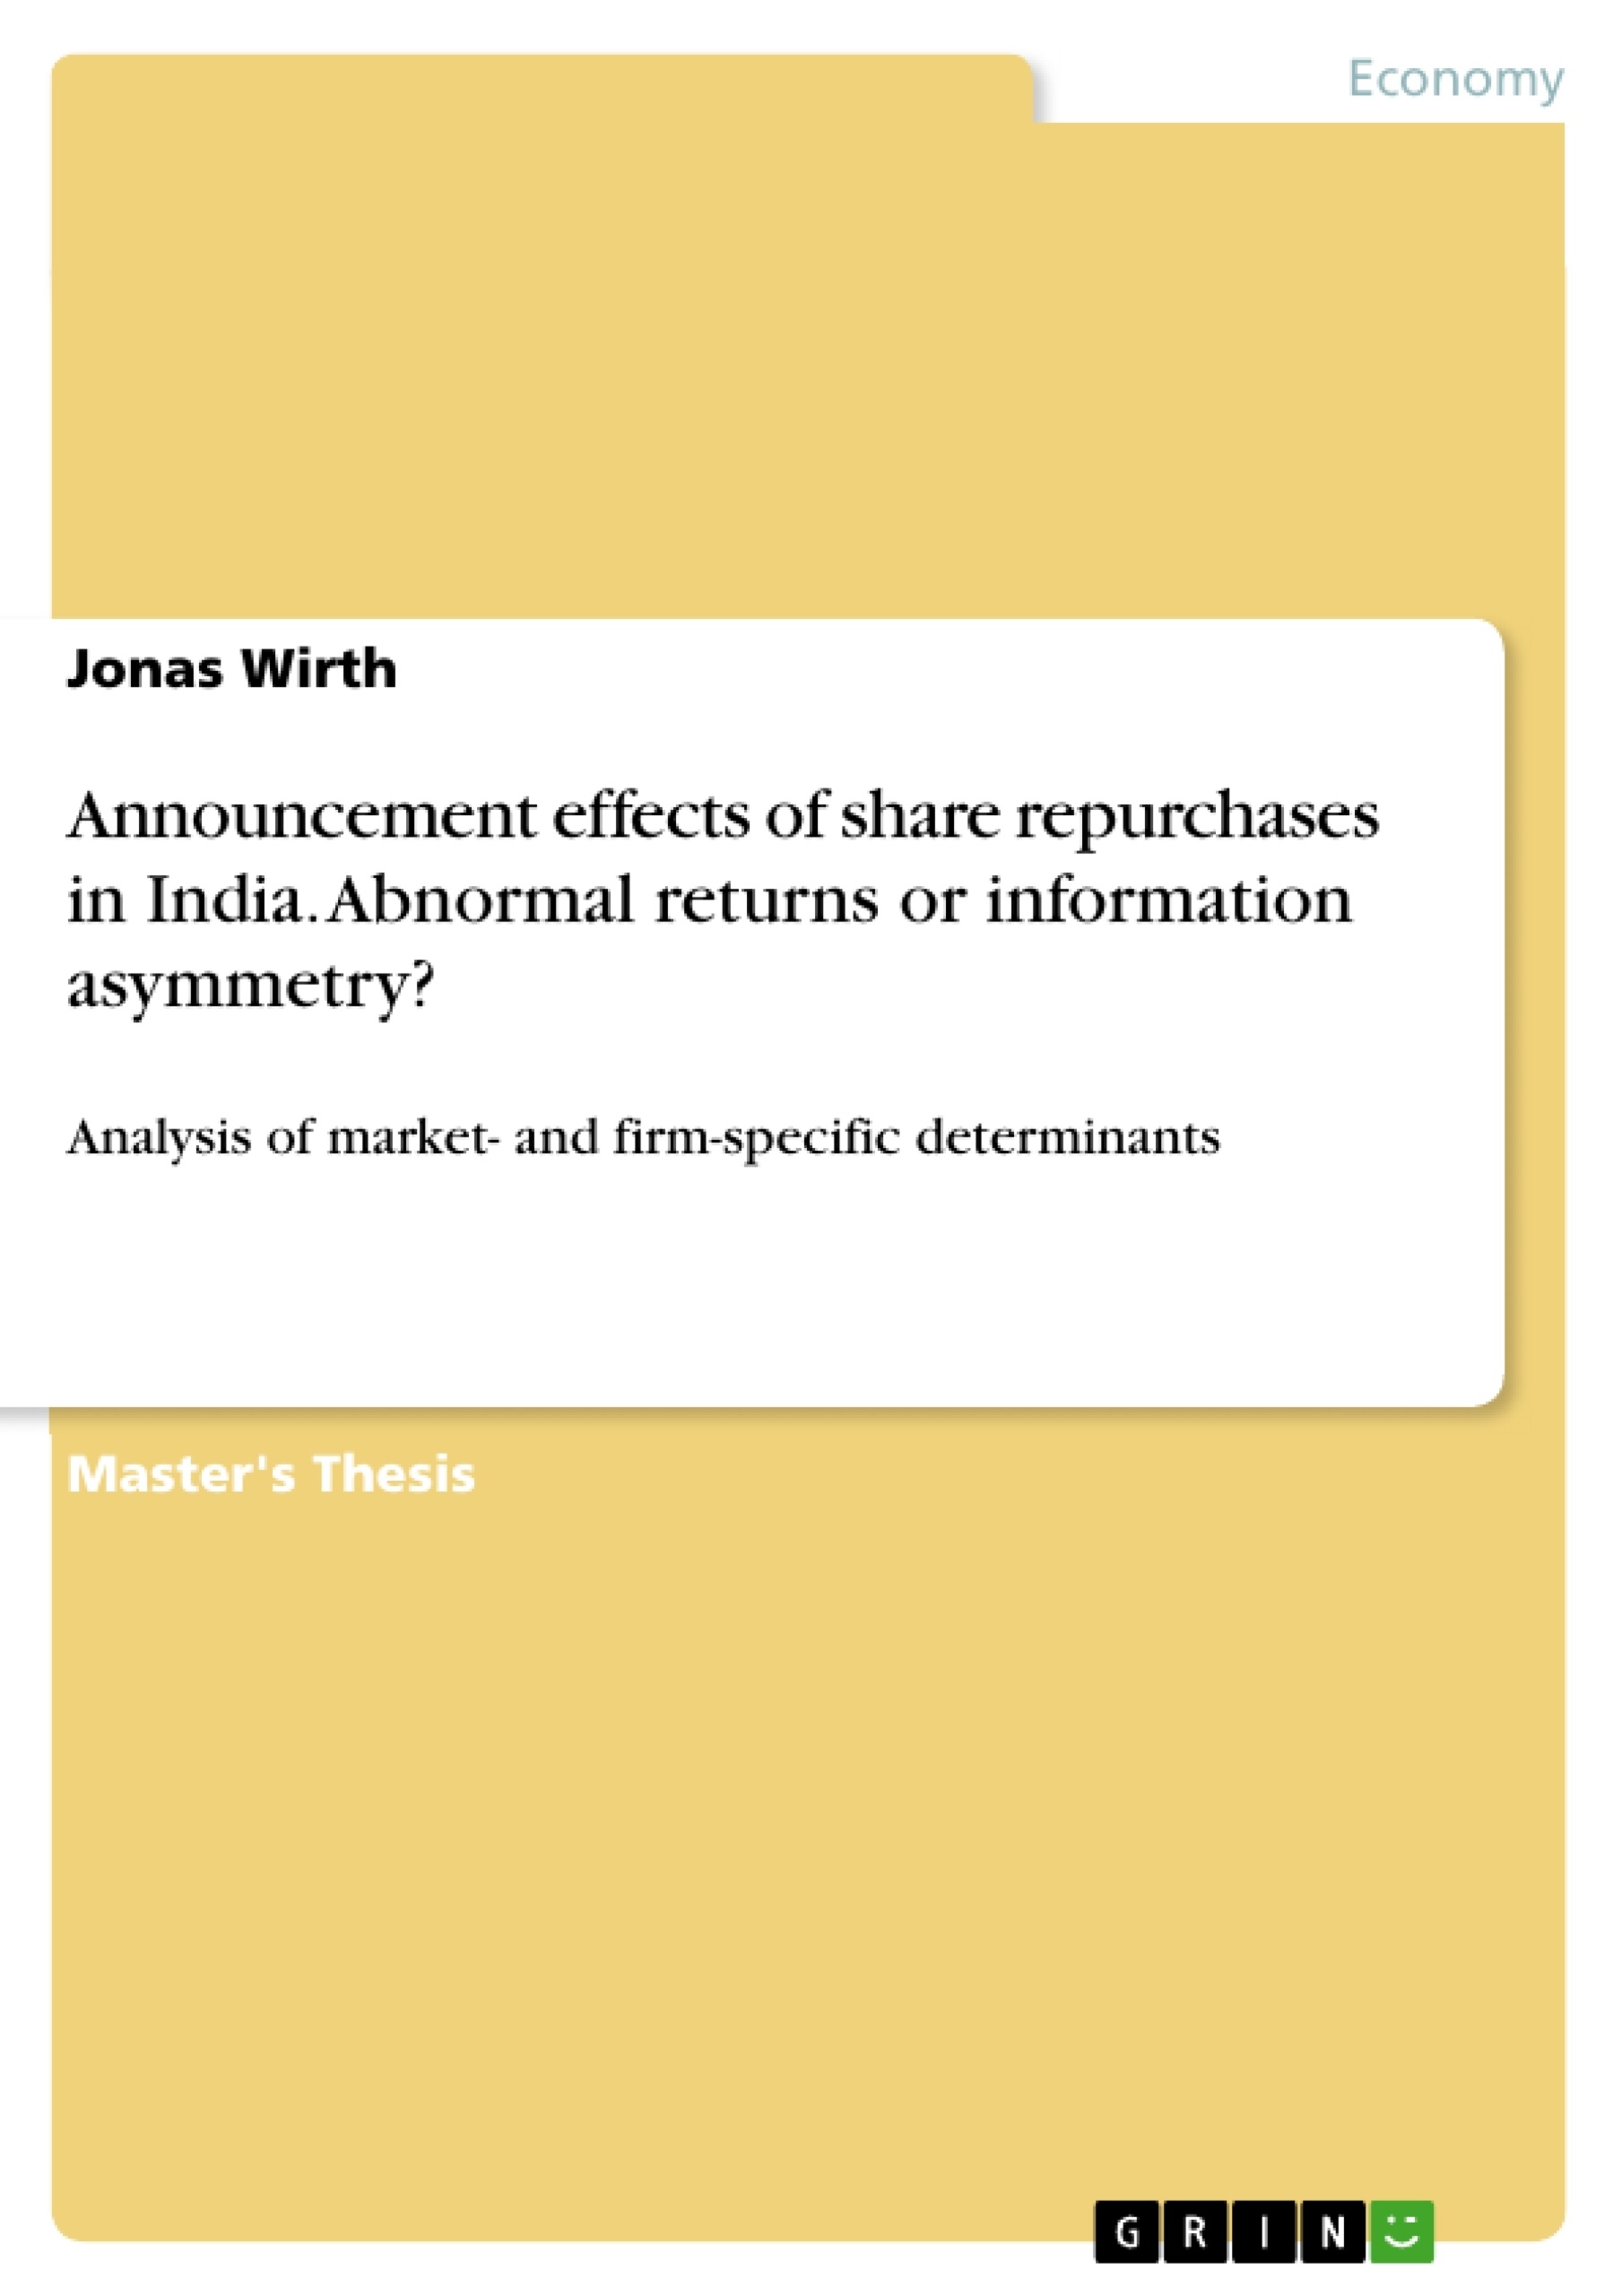 Titre: Announcement effects of share repurchases in India. Abnormal returns or information asymmetry?